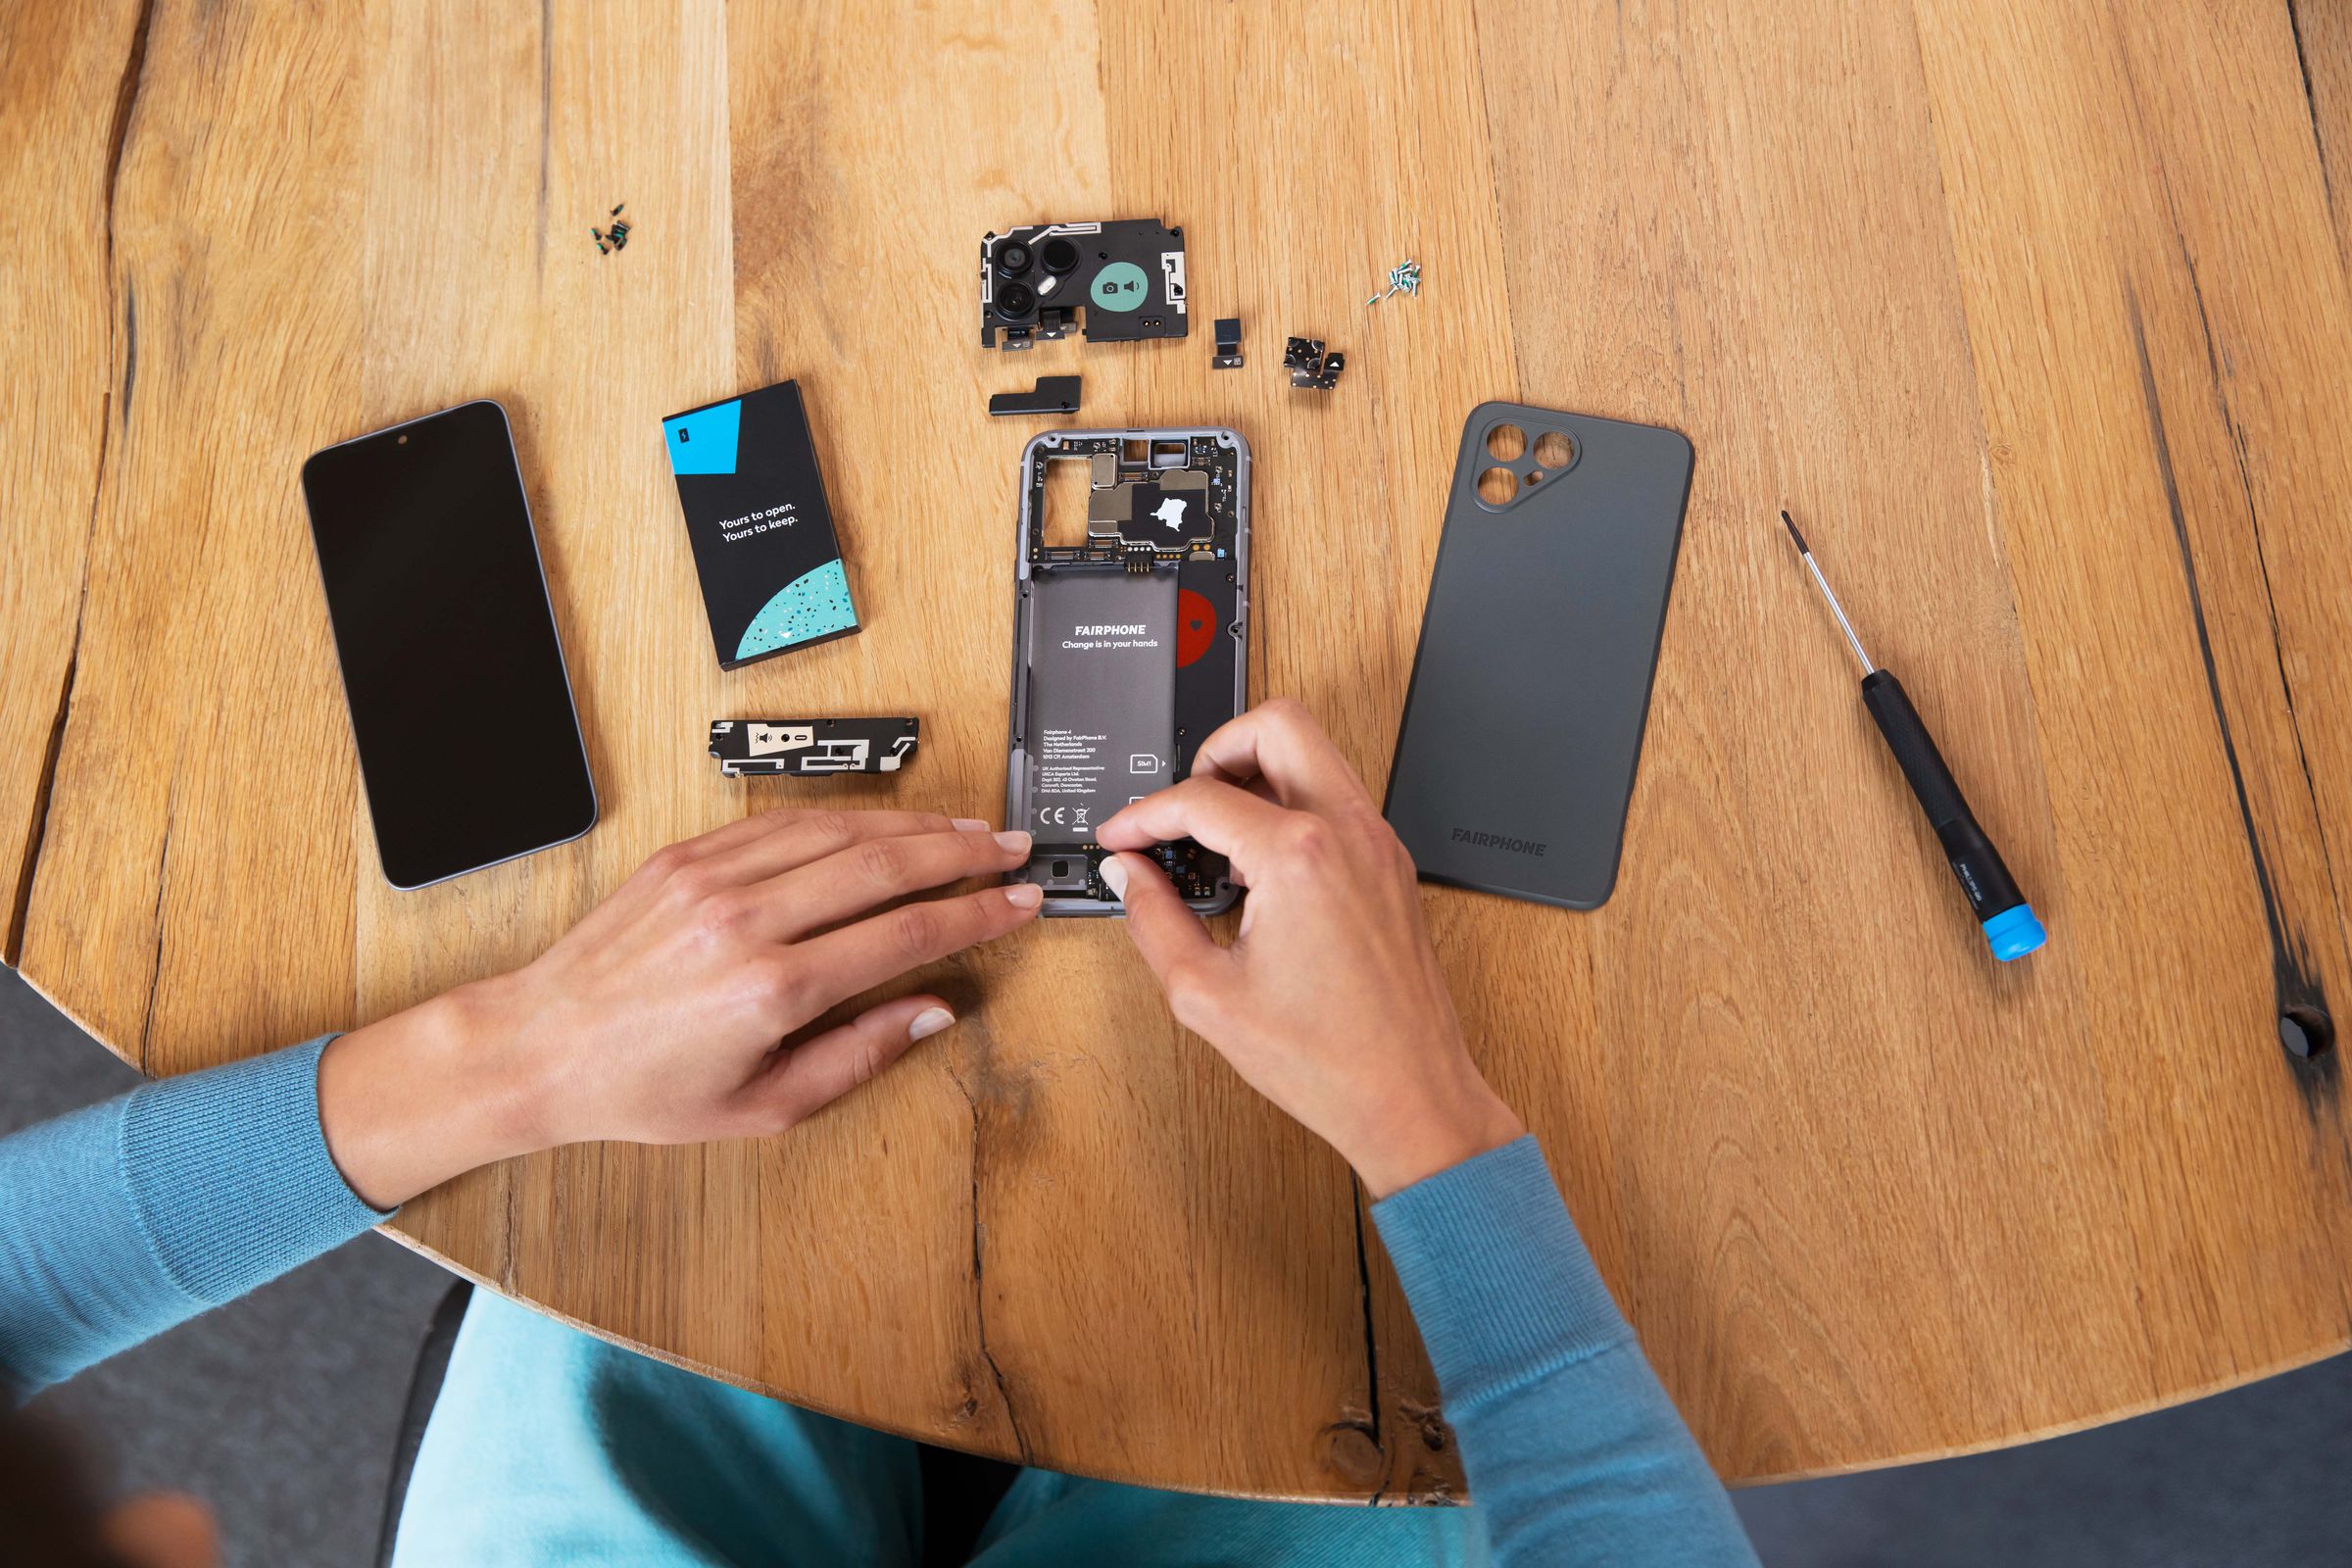 Like Fairphone’s previous devices, the Fairphone 4 is designed to be easy to disassemble.